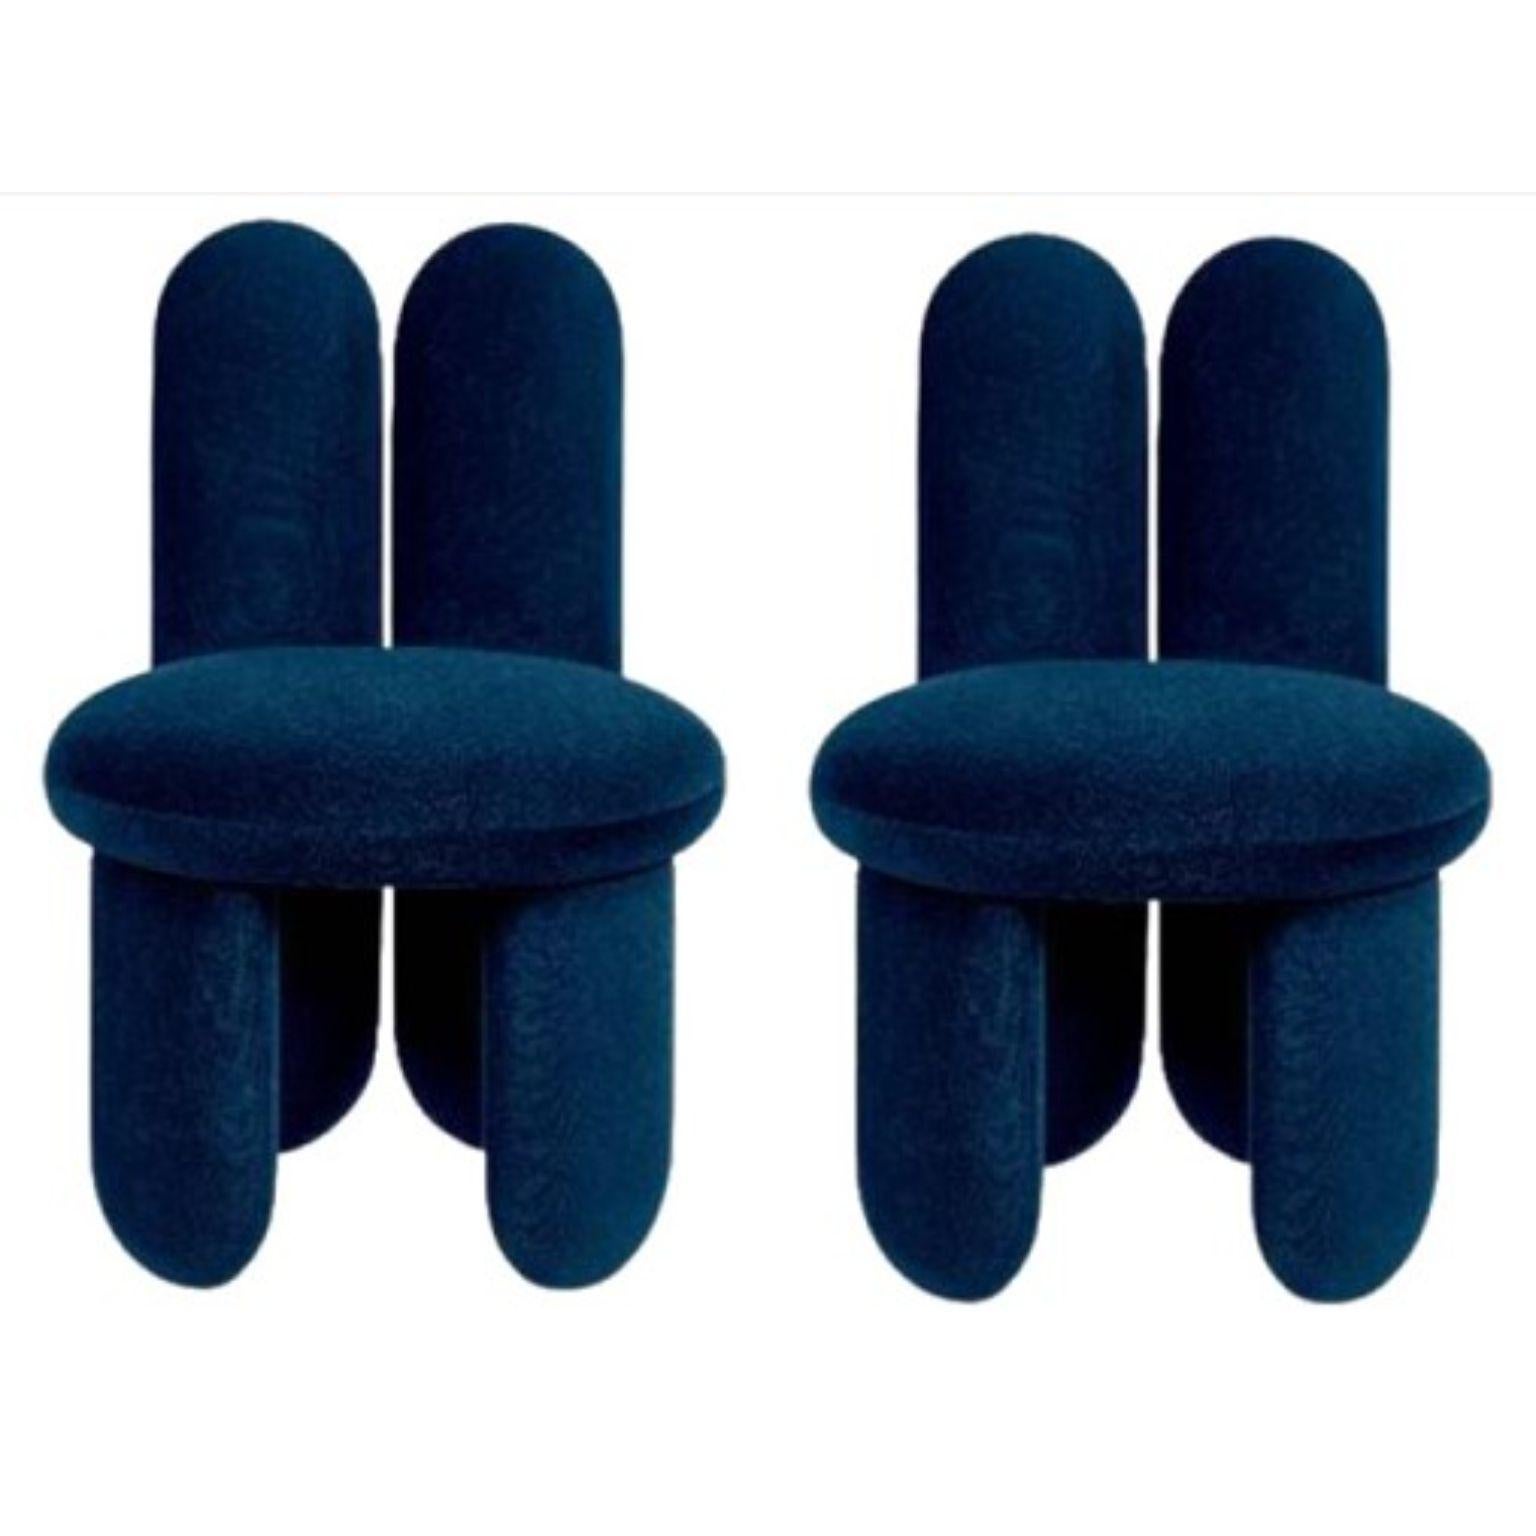 Set of 2 Glazy chairs, gentle 873 by Royal Stranger
Dimensions: W 58 D 84 H 85 cm SH 50 SD 46 cm
Materials: Upholstery

Also available: Upholstery in all Royal Stranger’s fabric collection, & COM (Client’s Own Material). Base Available lacquered